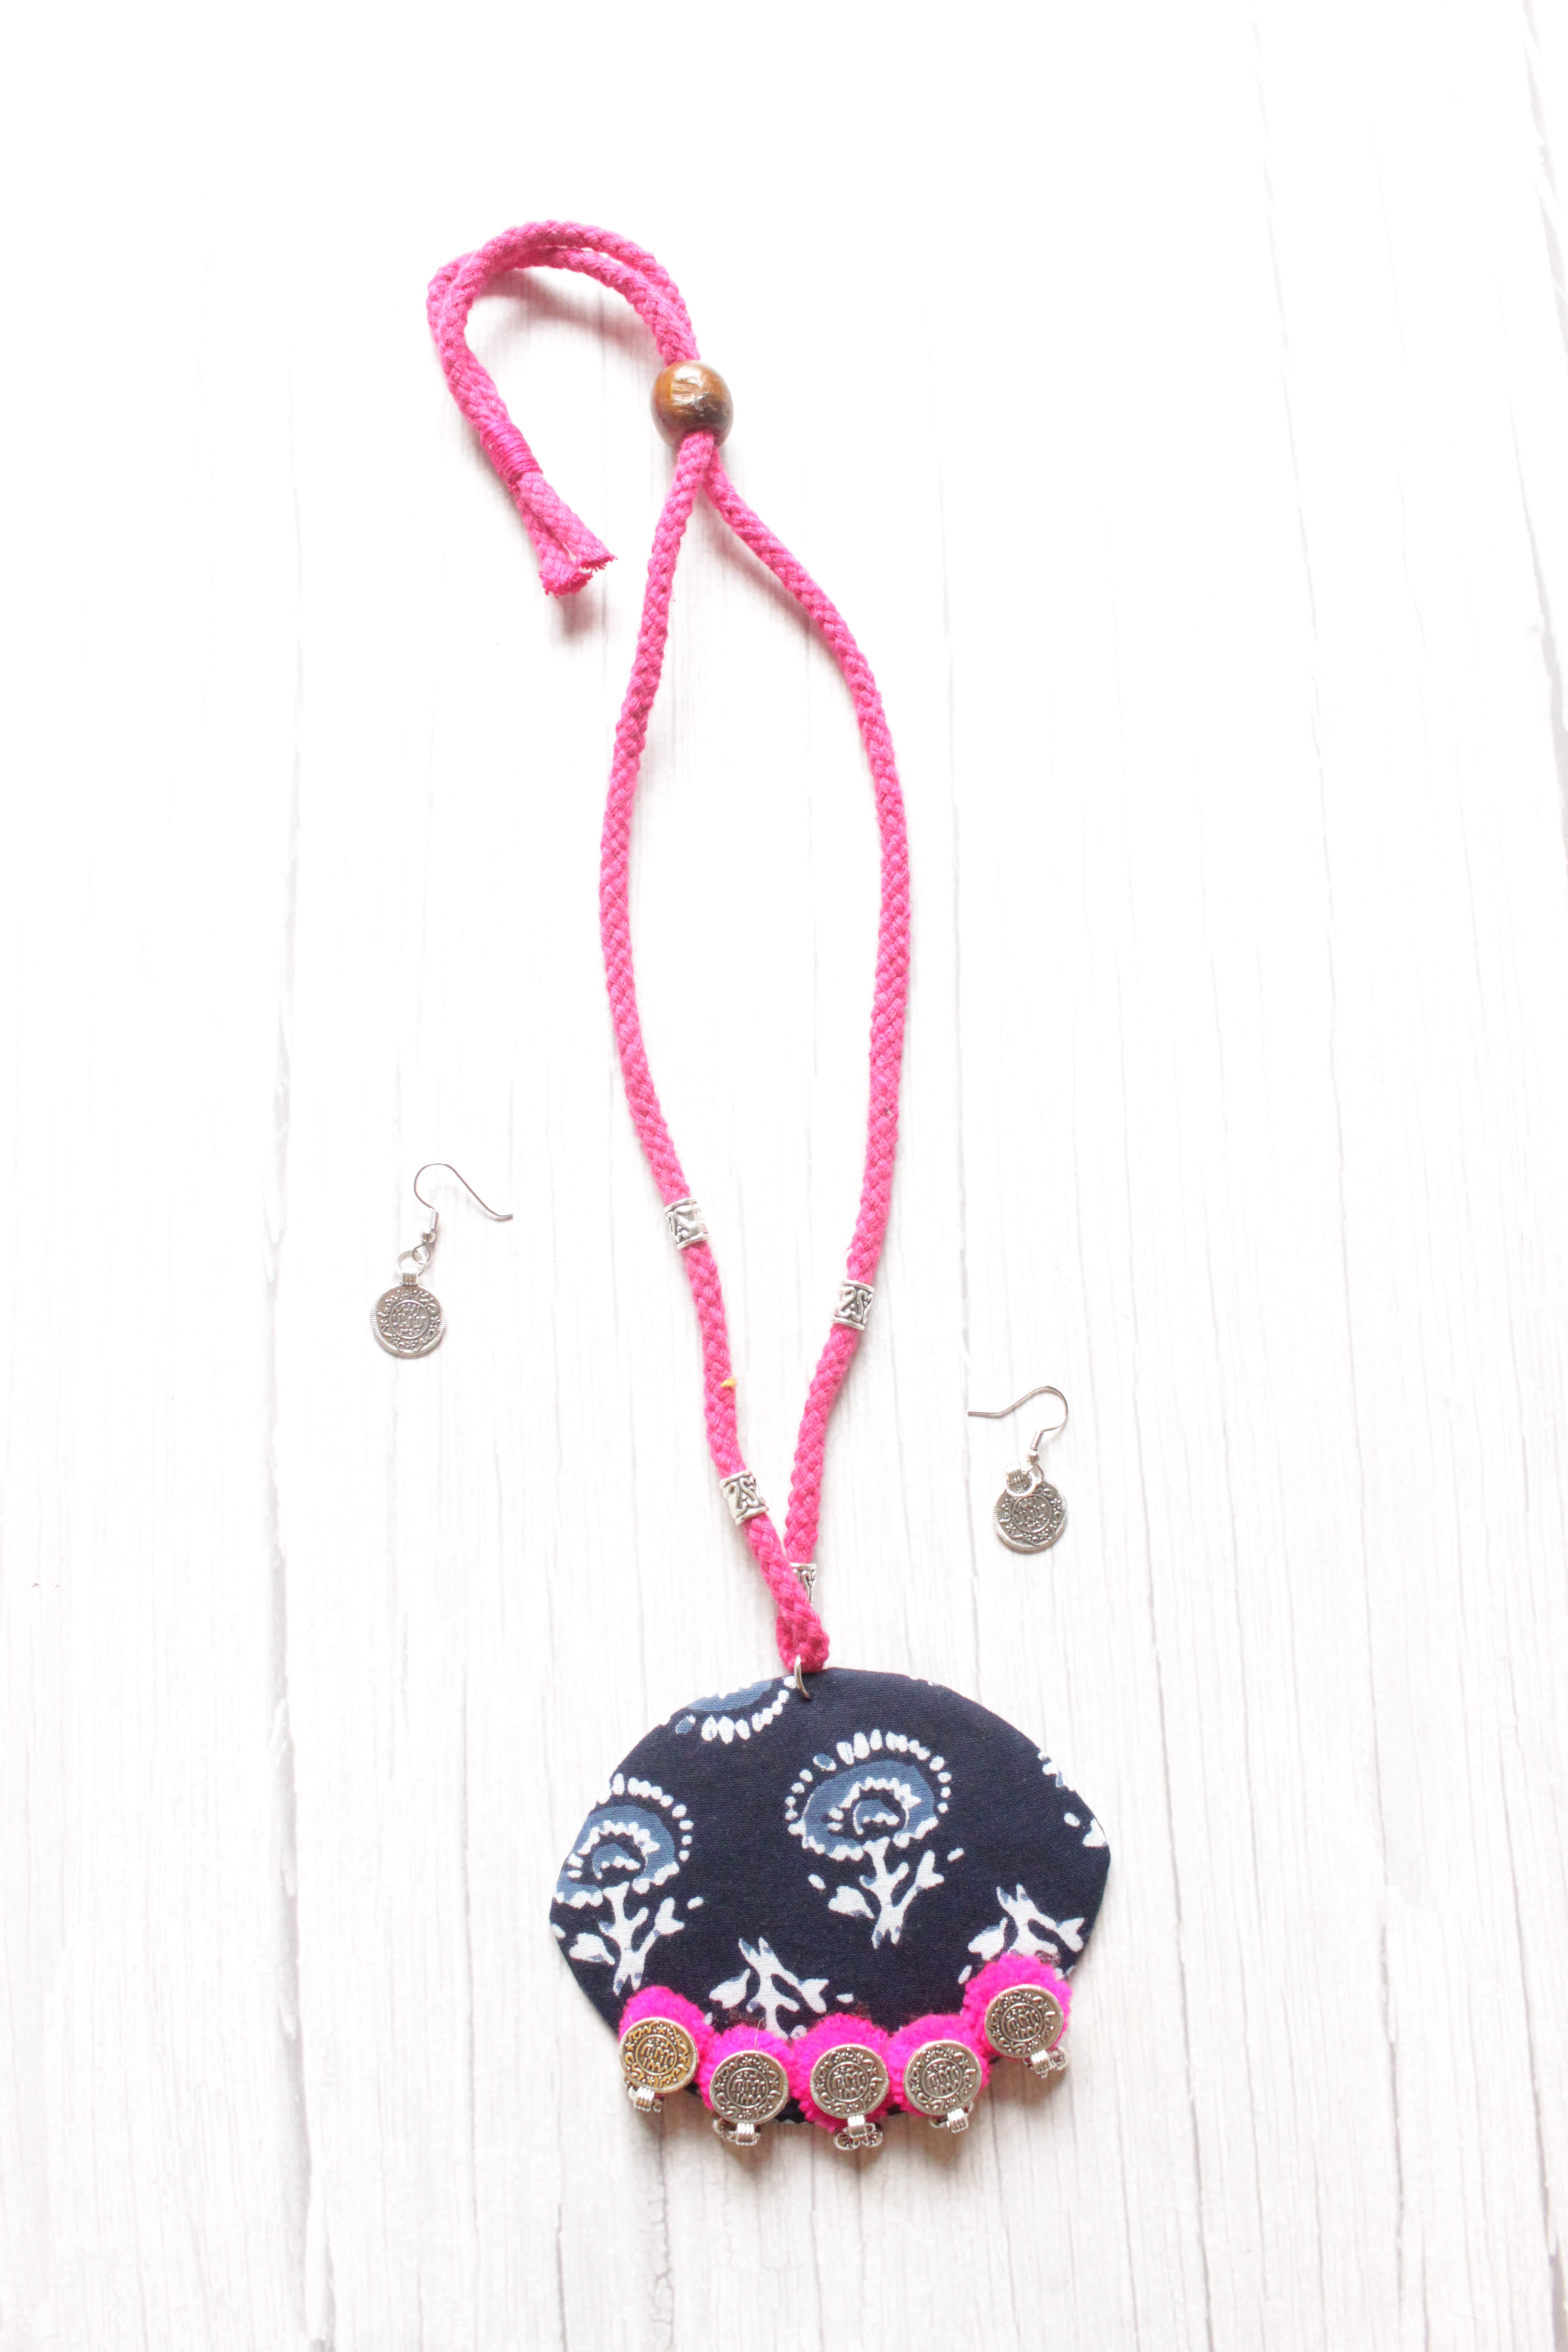 Hand Block Printed Bagru Fabric and Pom Pom and Metal Charms Necklace Set